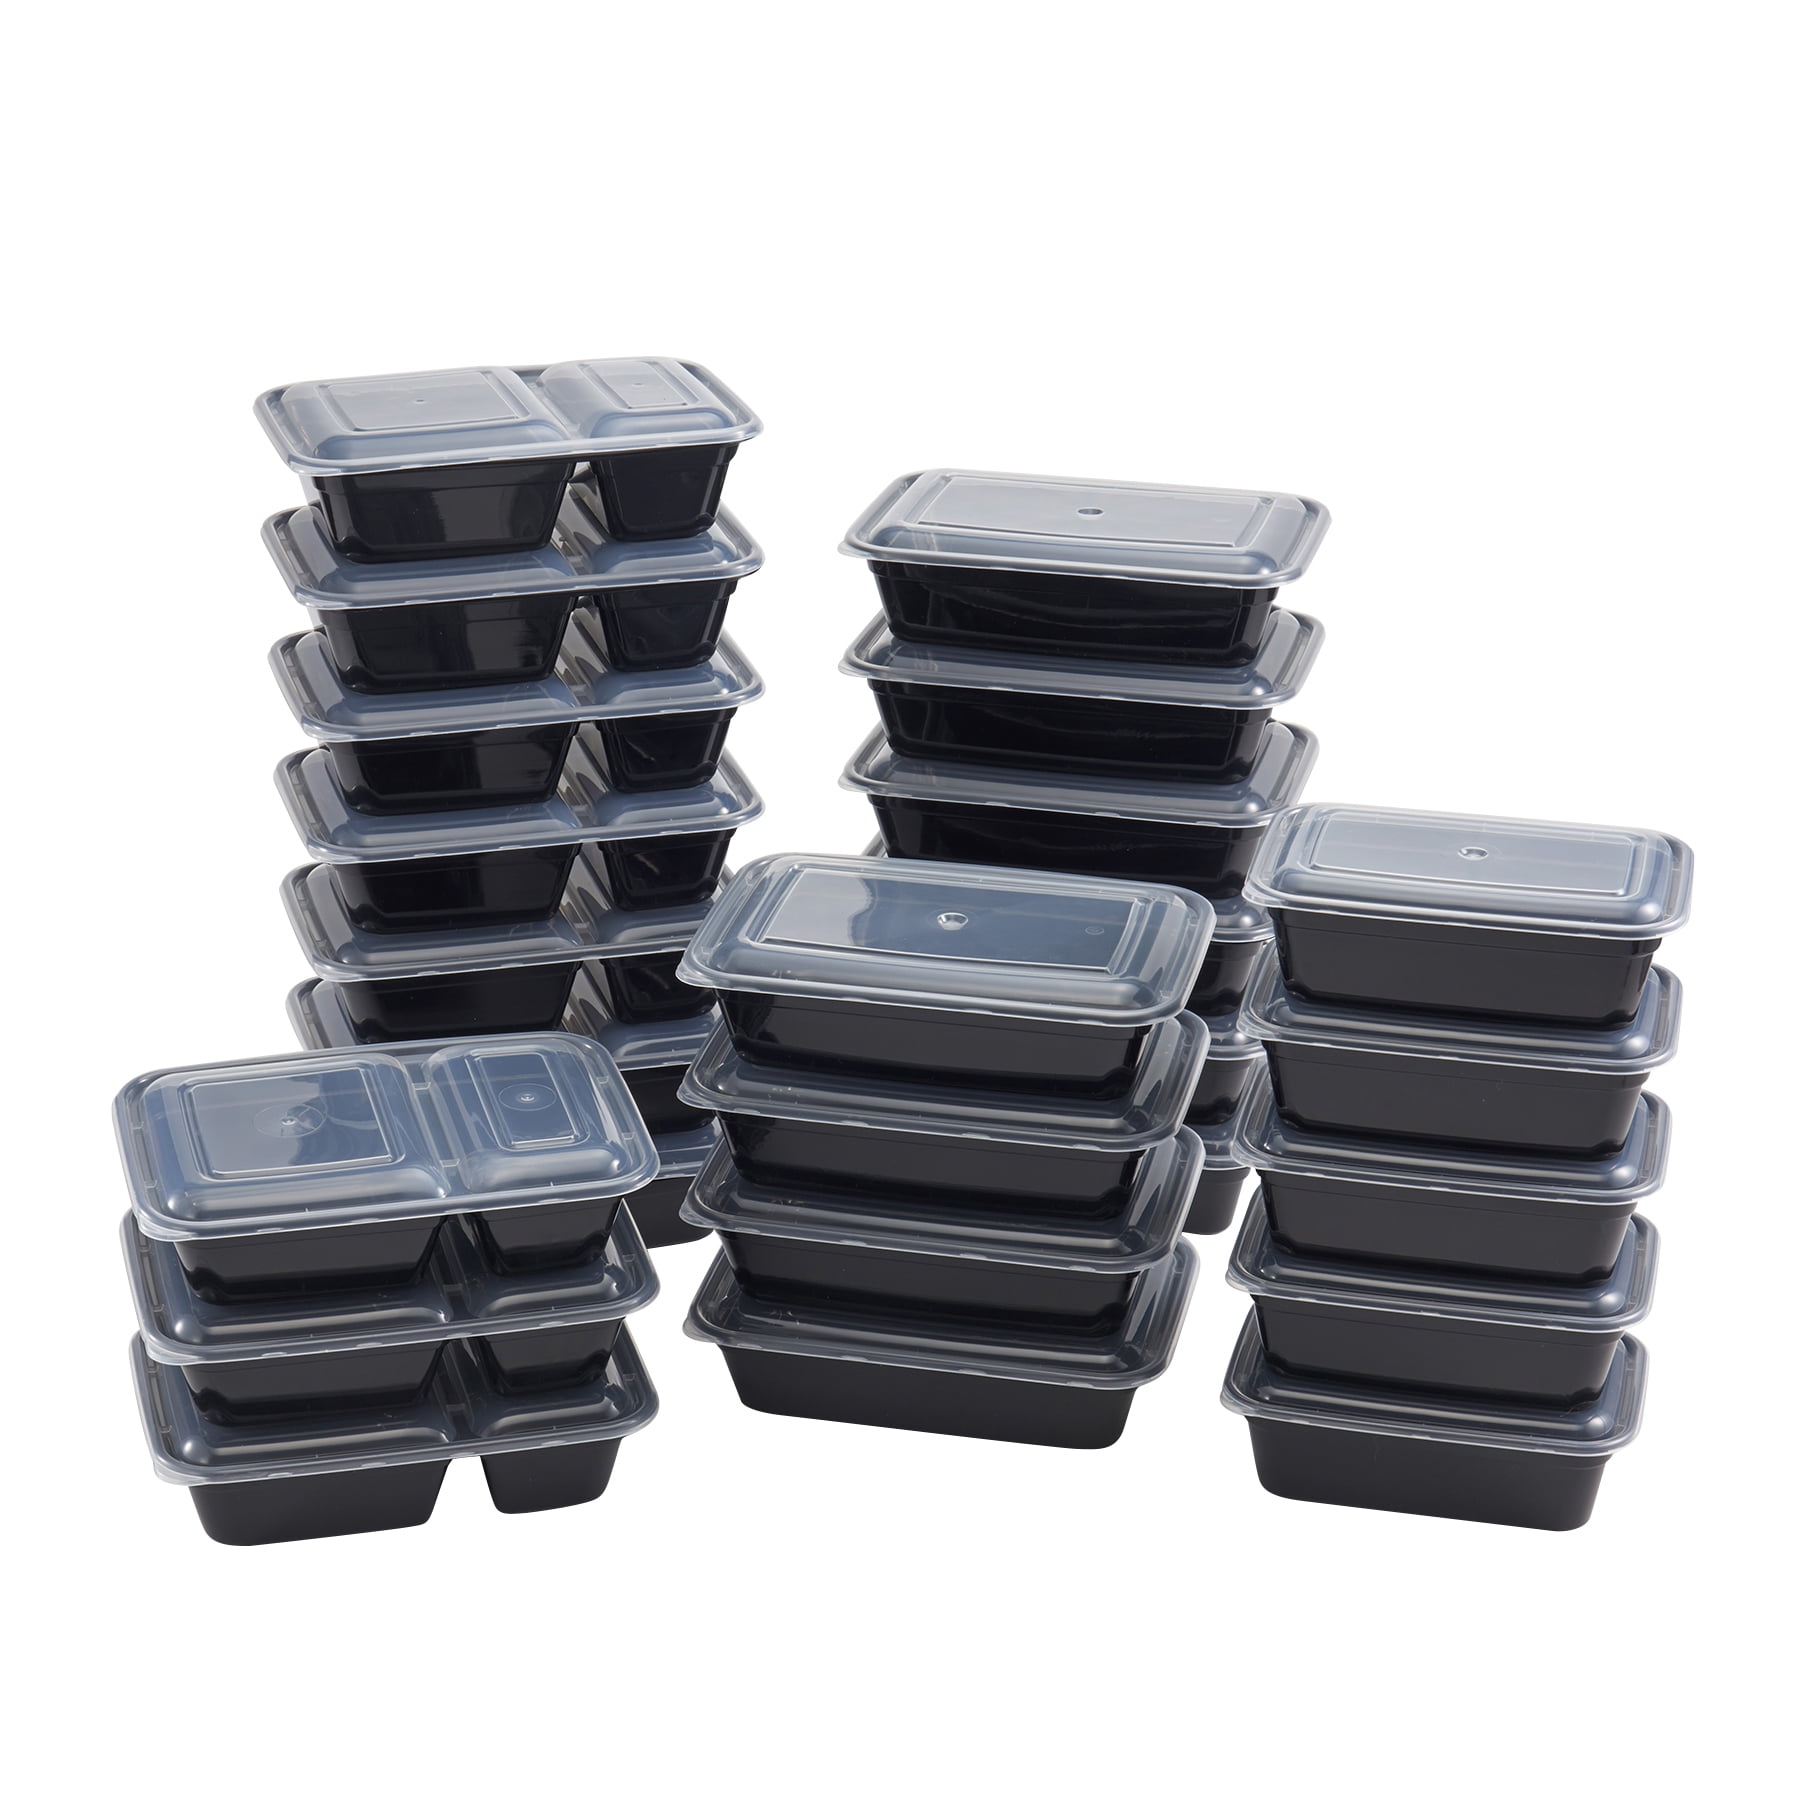 Mainstays Meal Prep Food Storage 25 Containers Reusable Containers